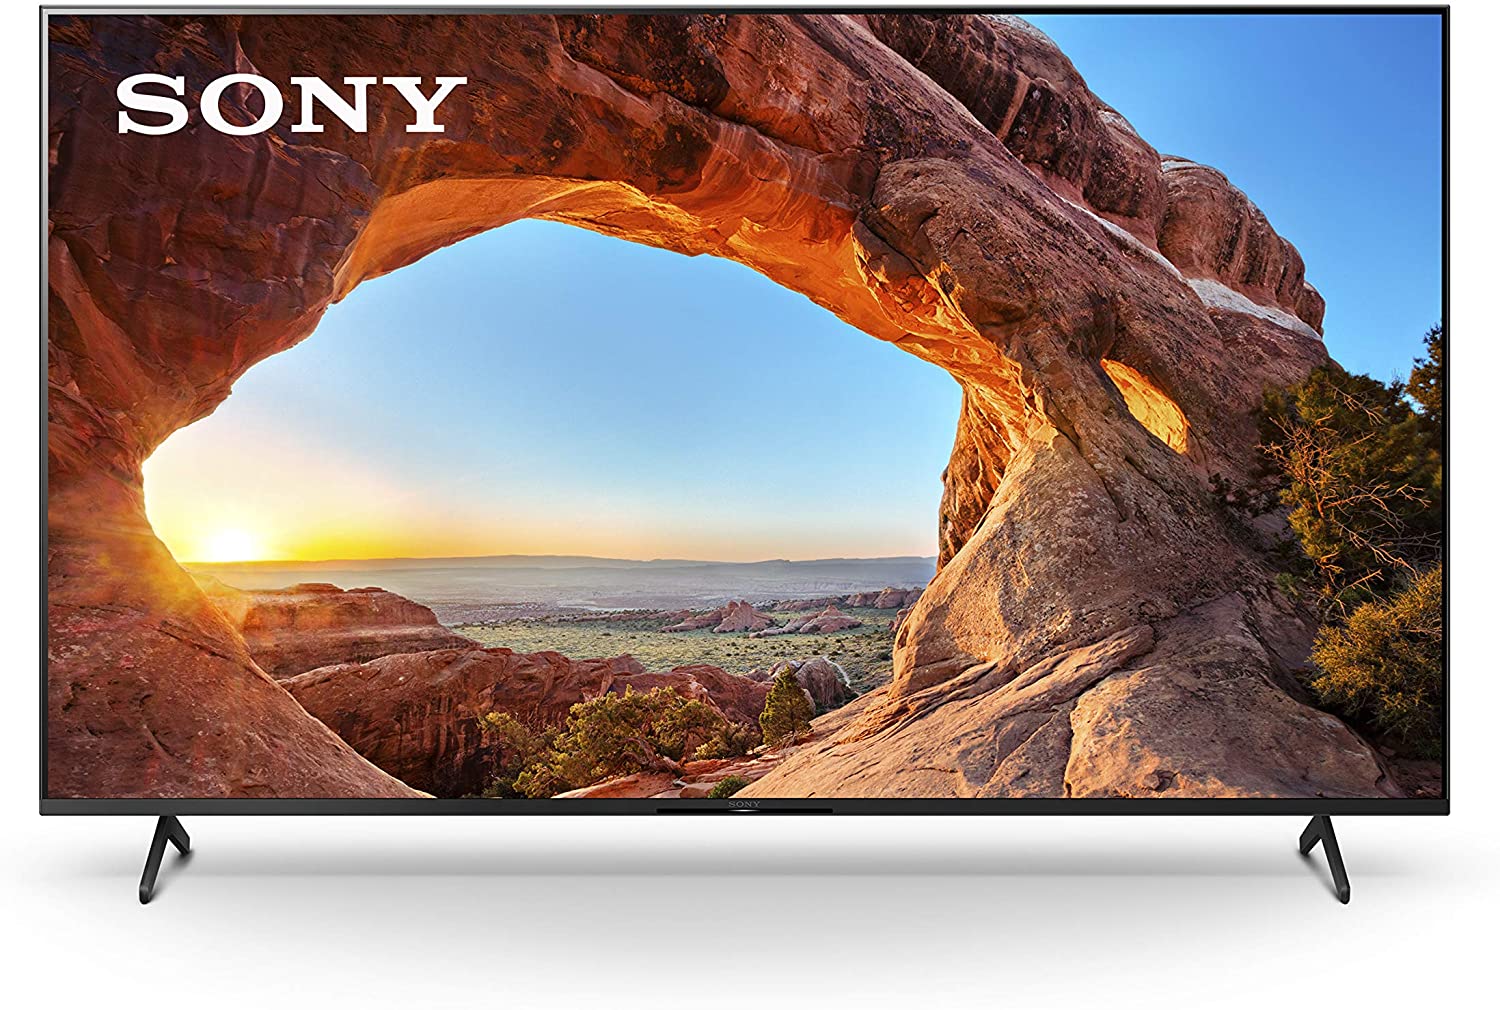 Sony X85J 4K TV's: 75" $1298, 65" $998, 85" $1998 & more + free s/h at Amazon